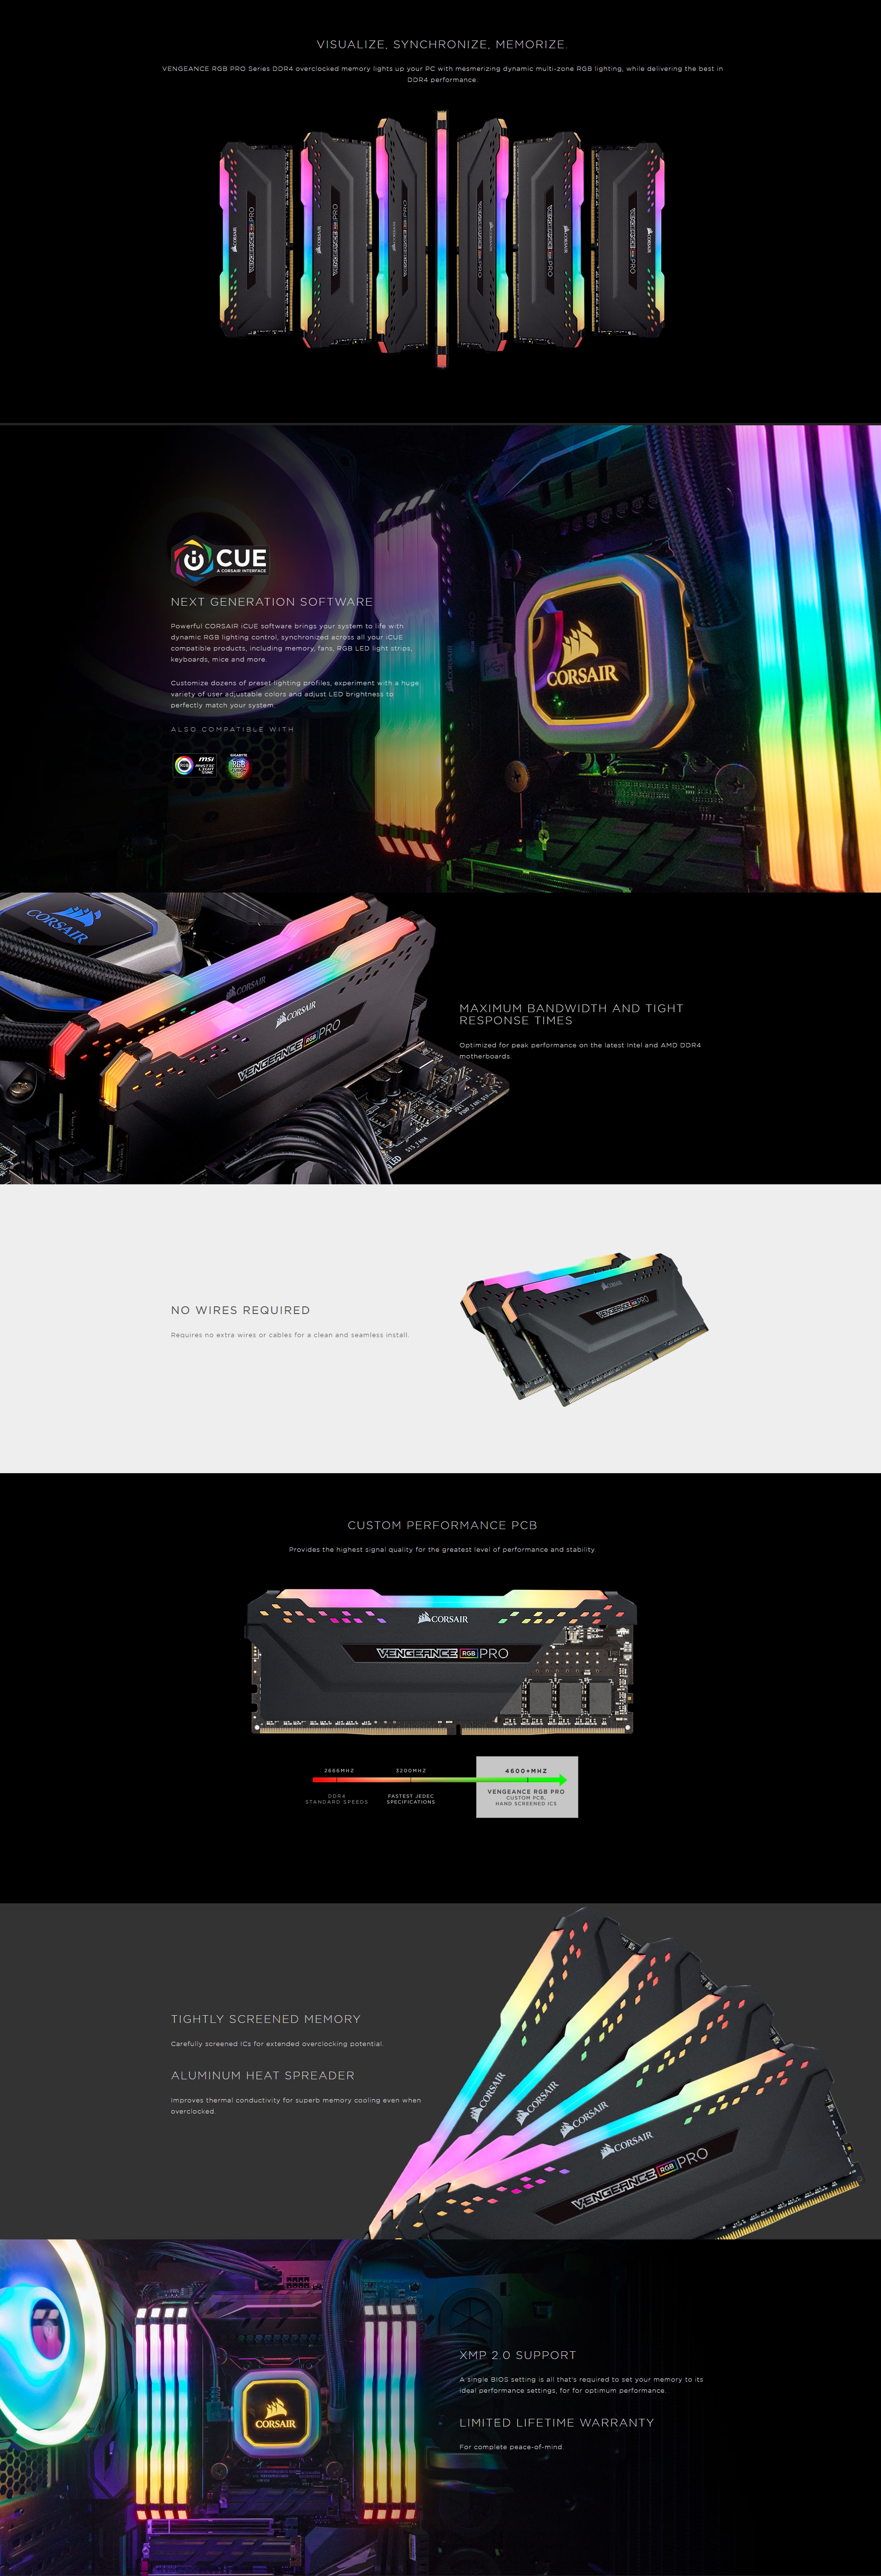 A large marketing image providing additional information about the product Corsair 16GB Kit (2x8GB) DDR4 Vengeance RGB Pro C18 3600MHz - Black - Additional alt info not provided